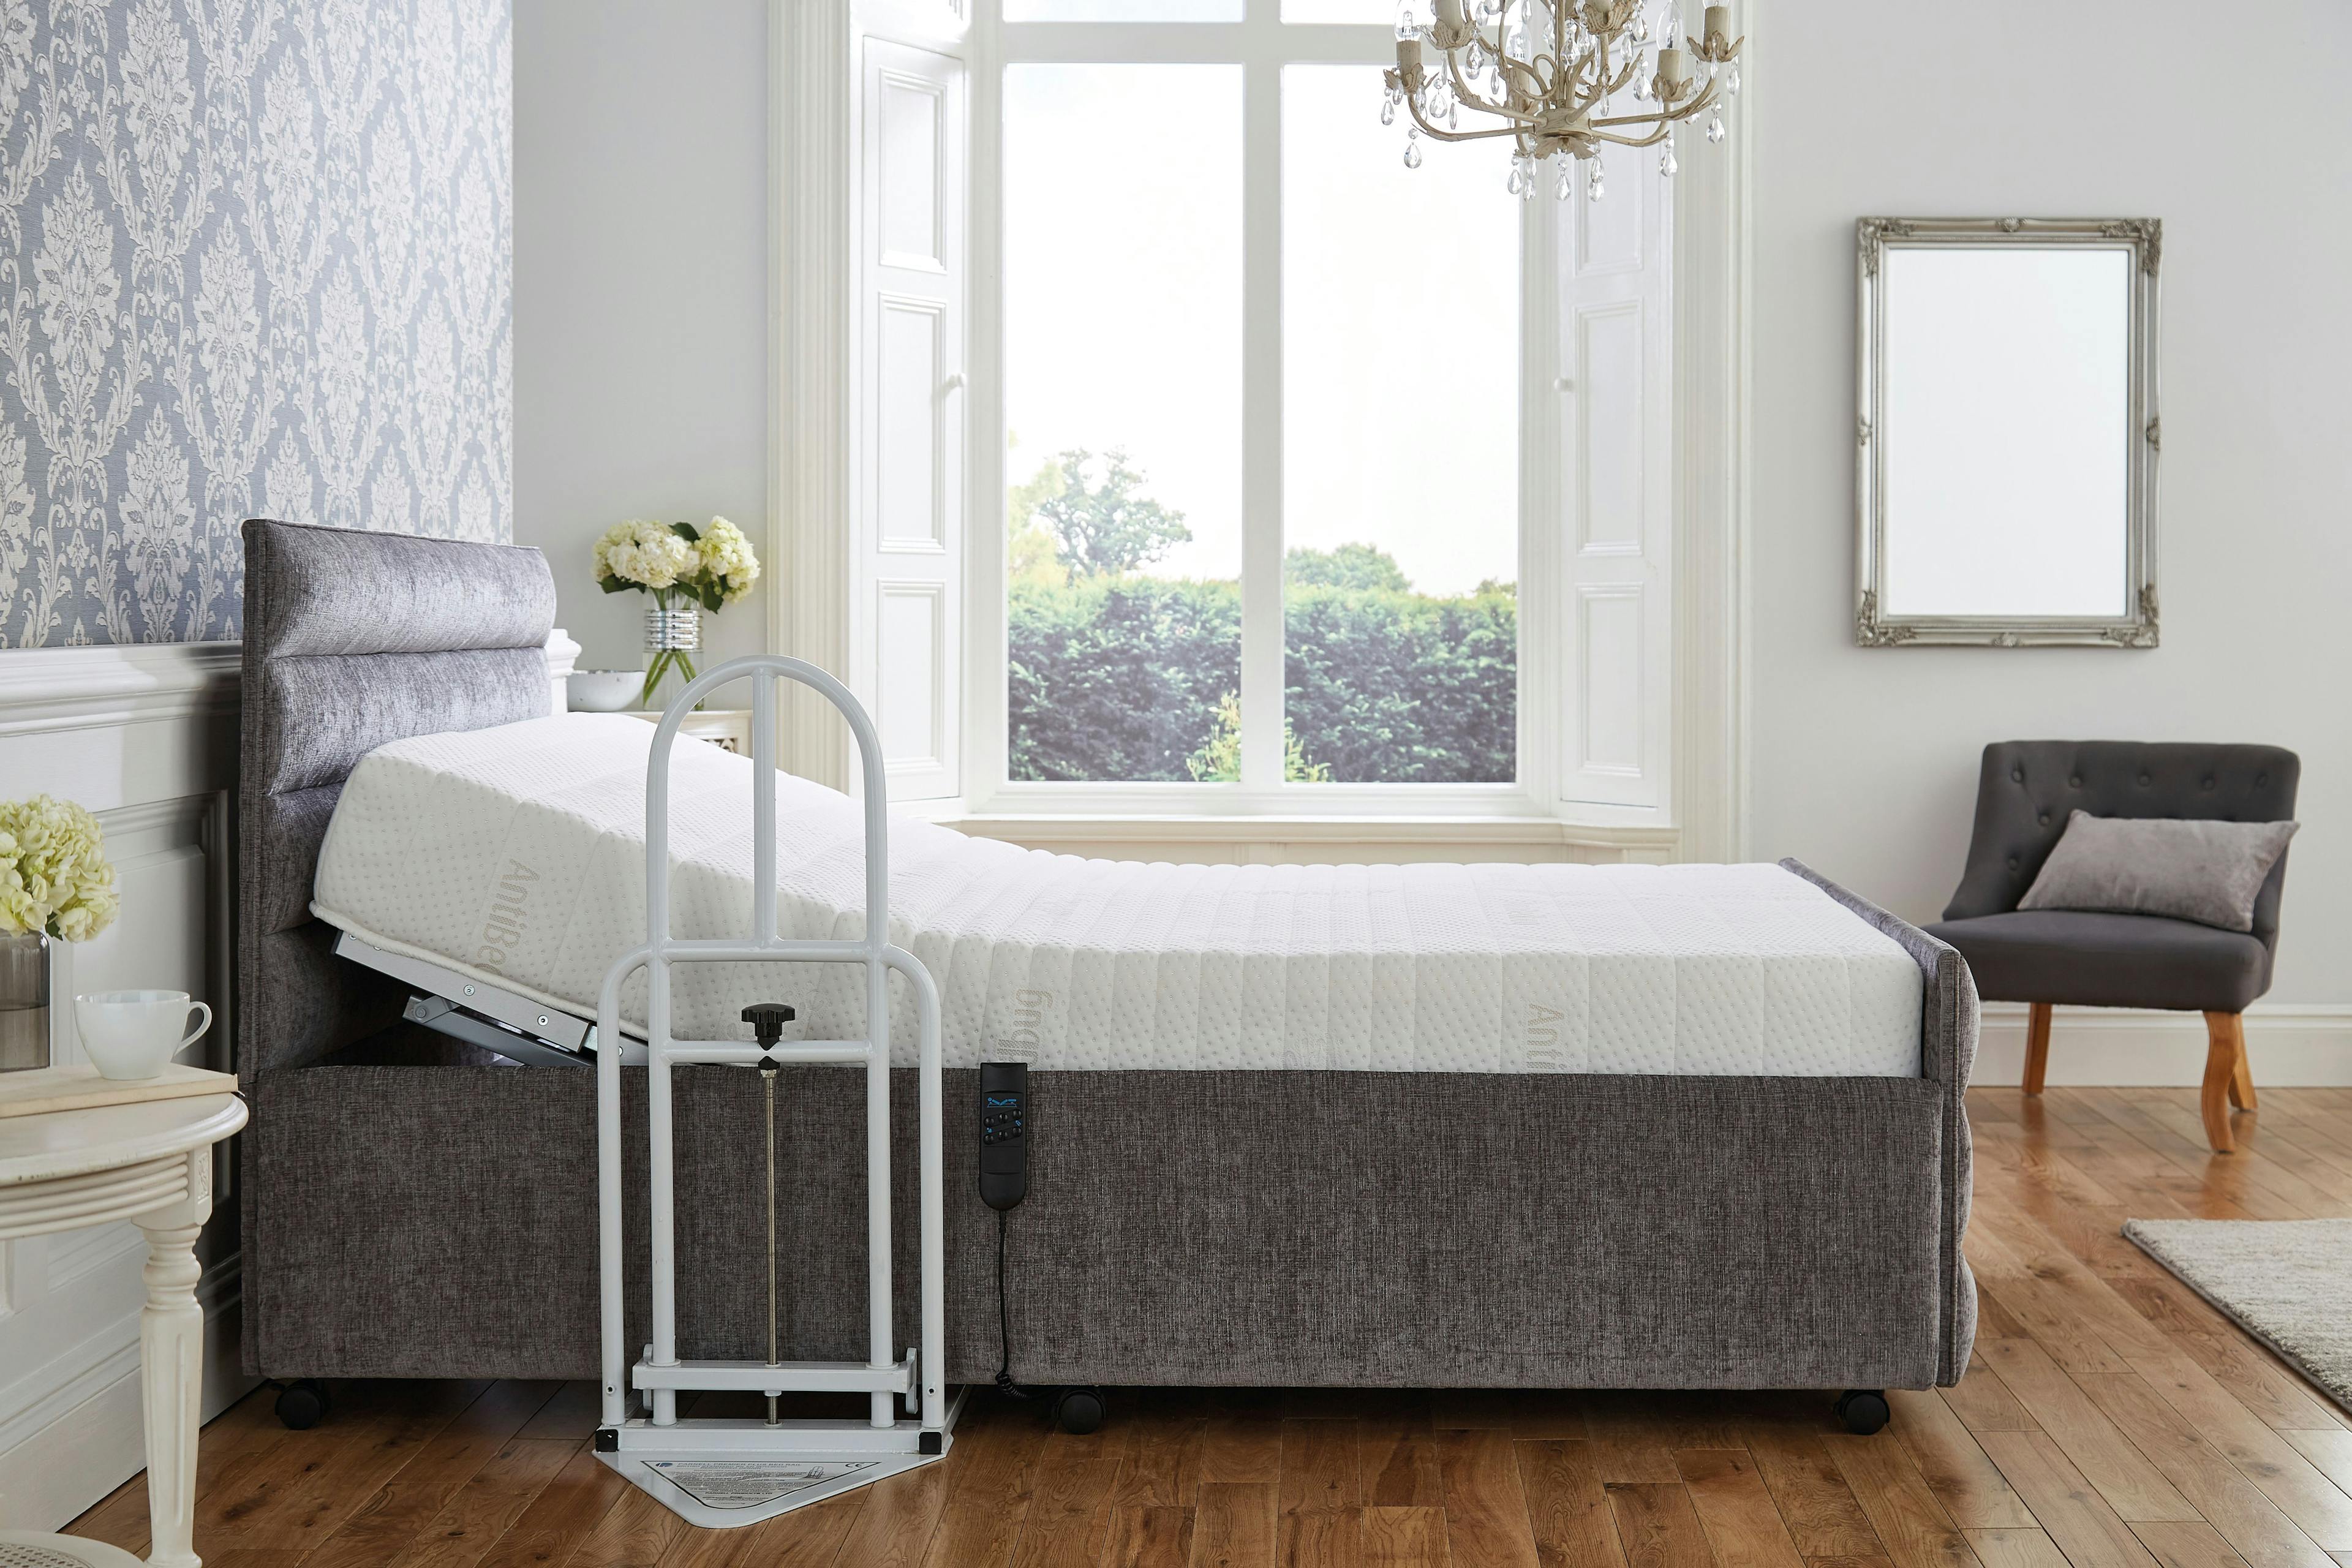 Image of our Warwrick double side on bed with bed rail.